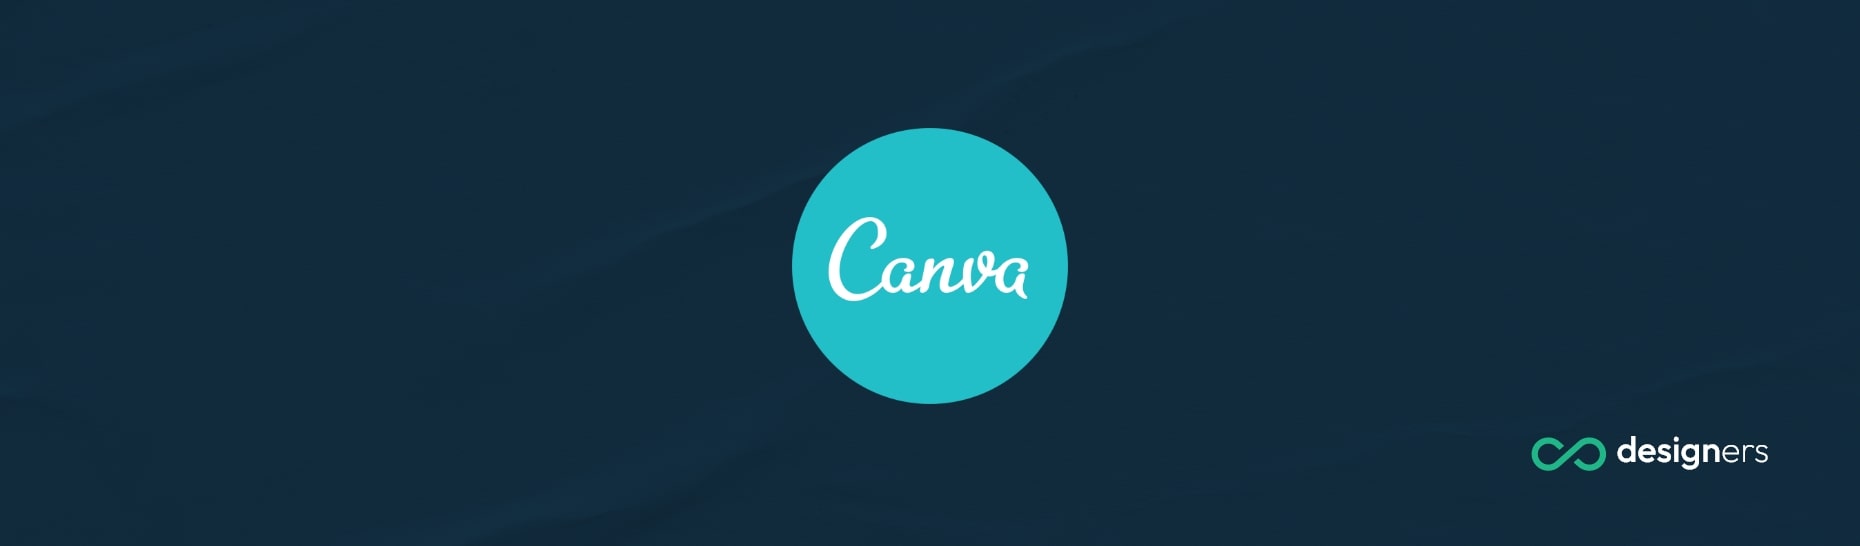 Can I Use Canva Images on YouTube?